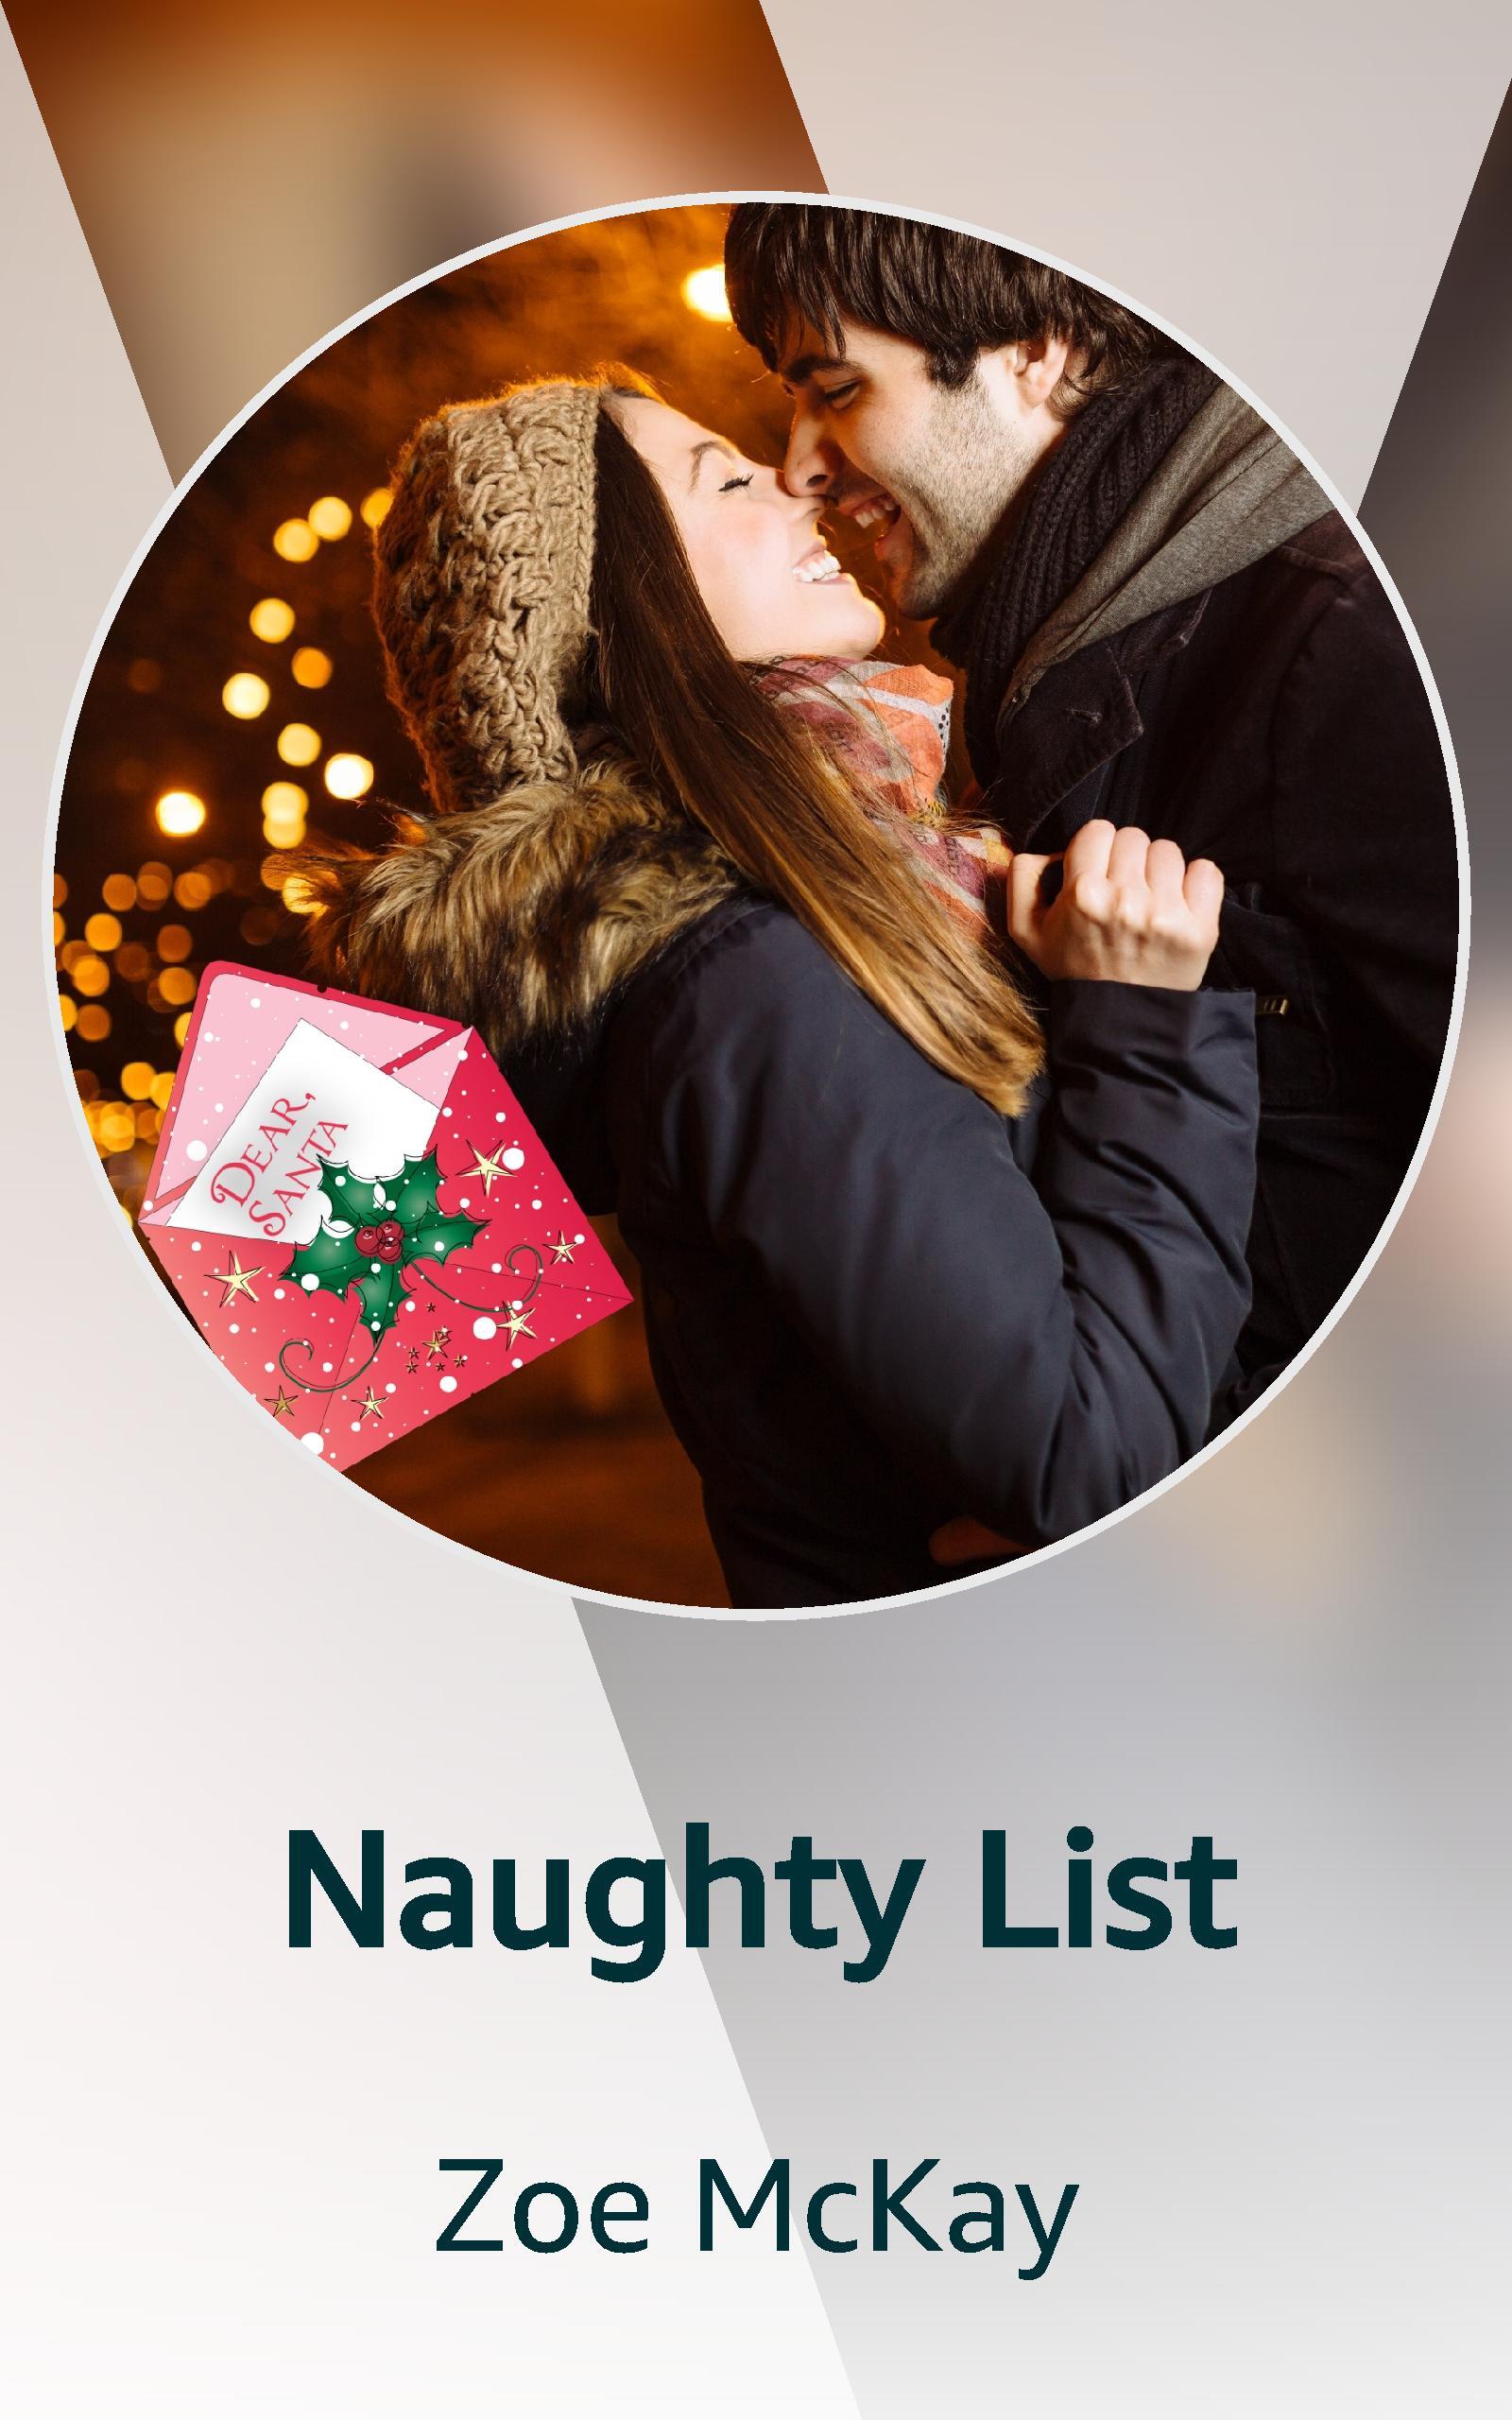 Naughty List by Zoe McKay. Happy couple with lips nearly touching with Christmas lights in the background. They're dressed in winter clothing. And there's a red envelope and a paper sticking out of it that says Dear Santa